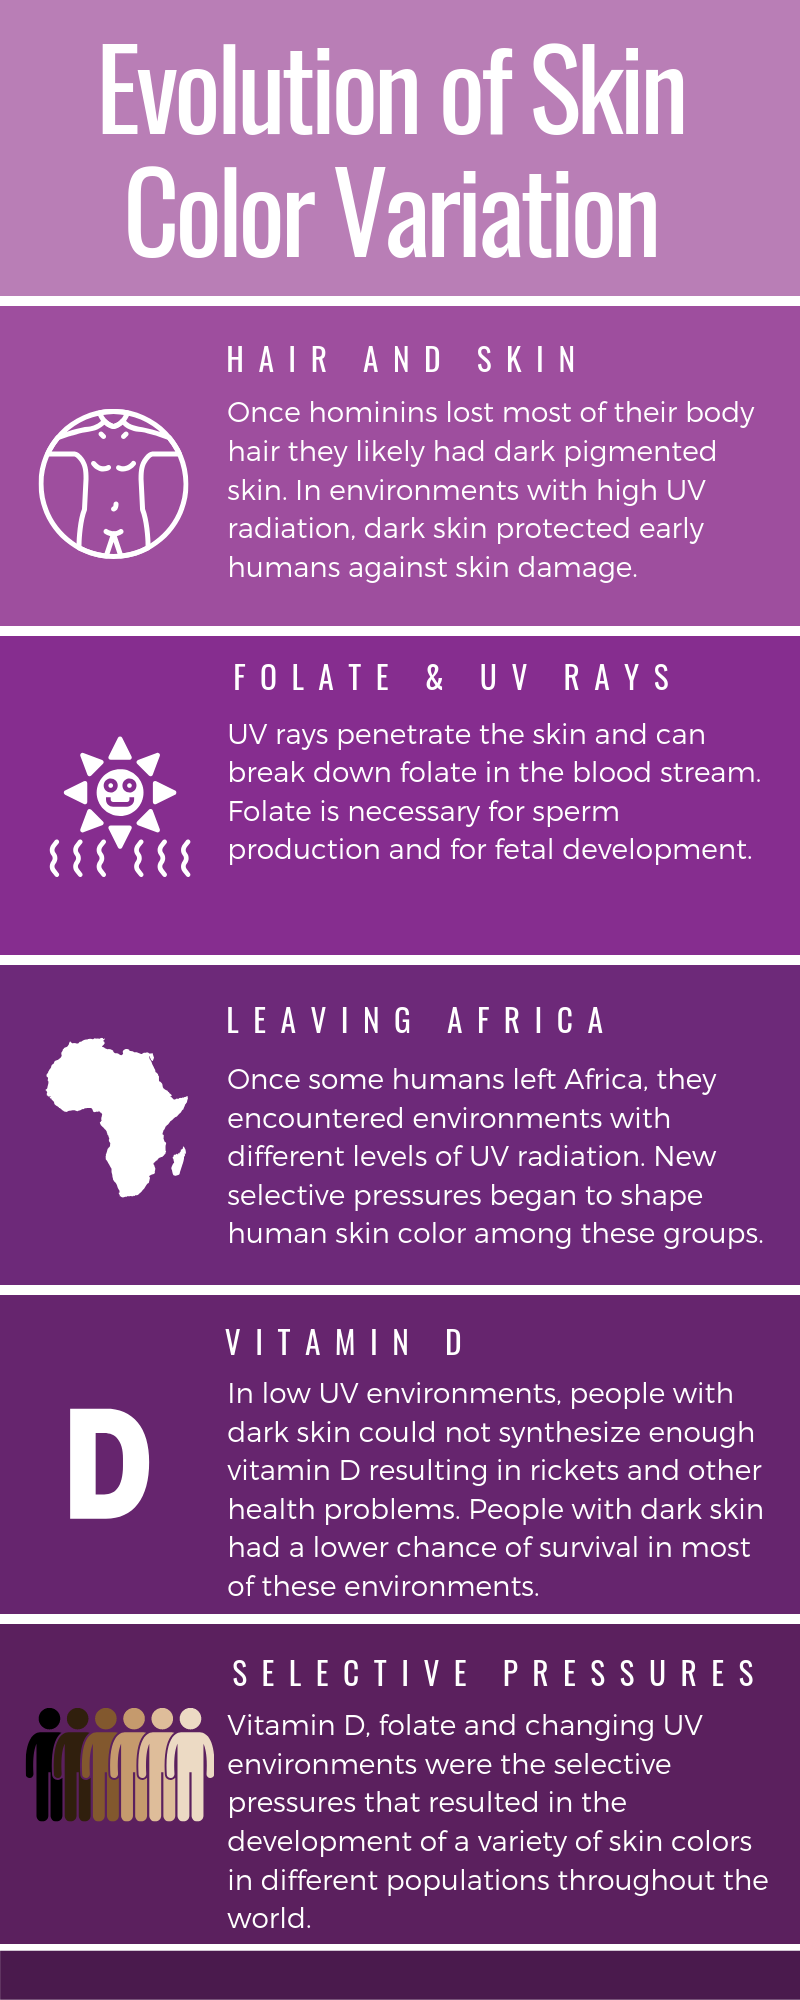 Table discussing hair and skin, folate and UV rays, leaving Africa, vitamin D, and selective pressures.